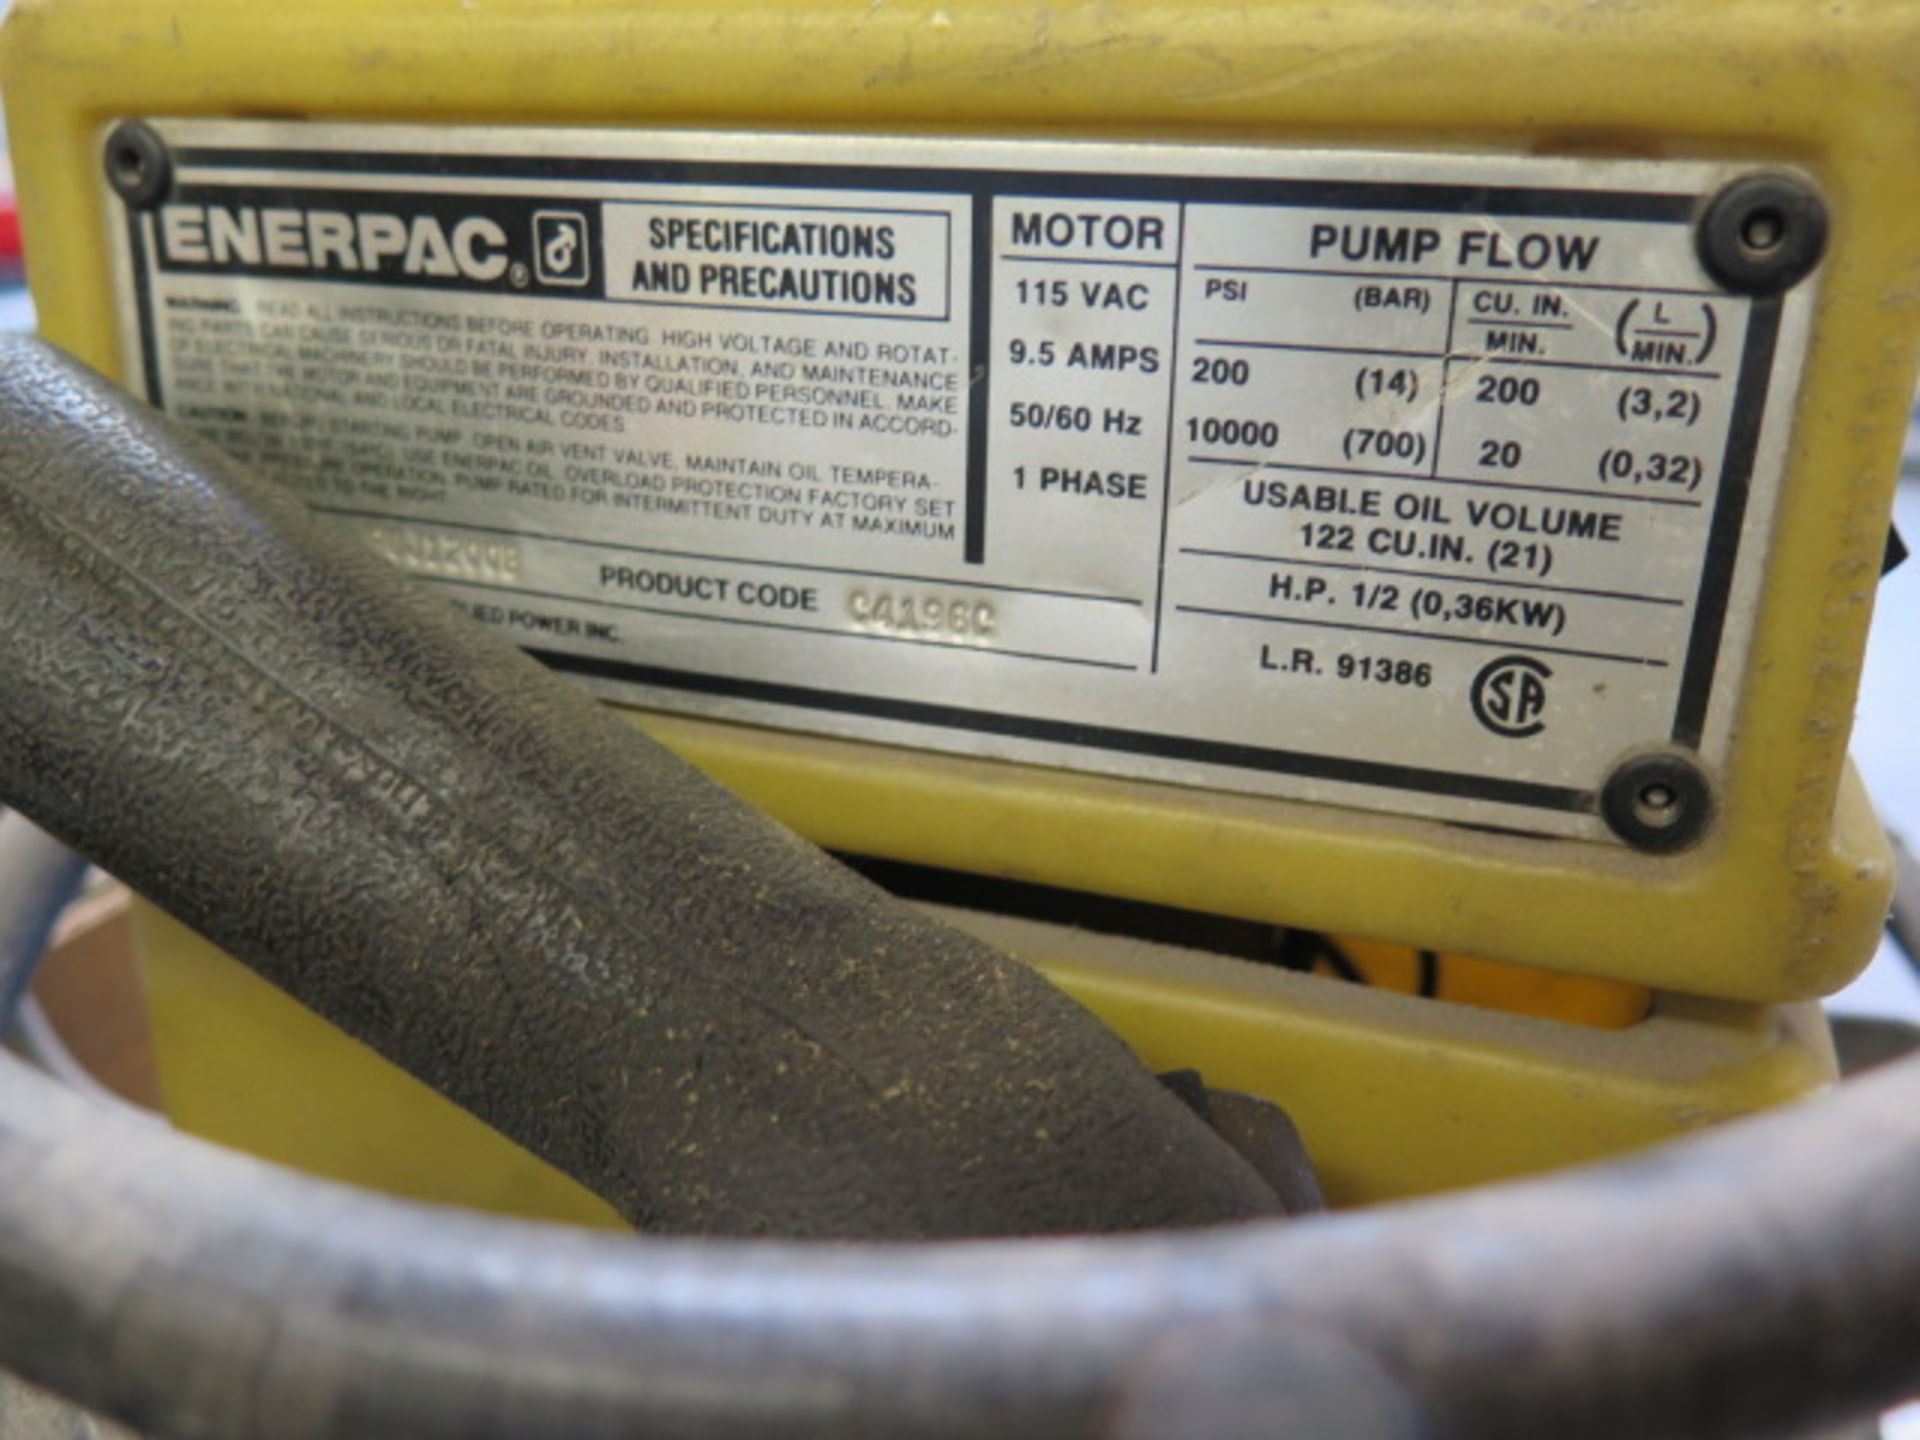 Enerpac mdl. PUJ1200B Electric Hudraulic Pump (SOLD AS-IS - NO WARRANTY) - Image 6 of 6